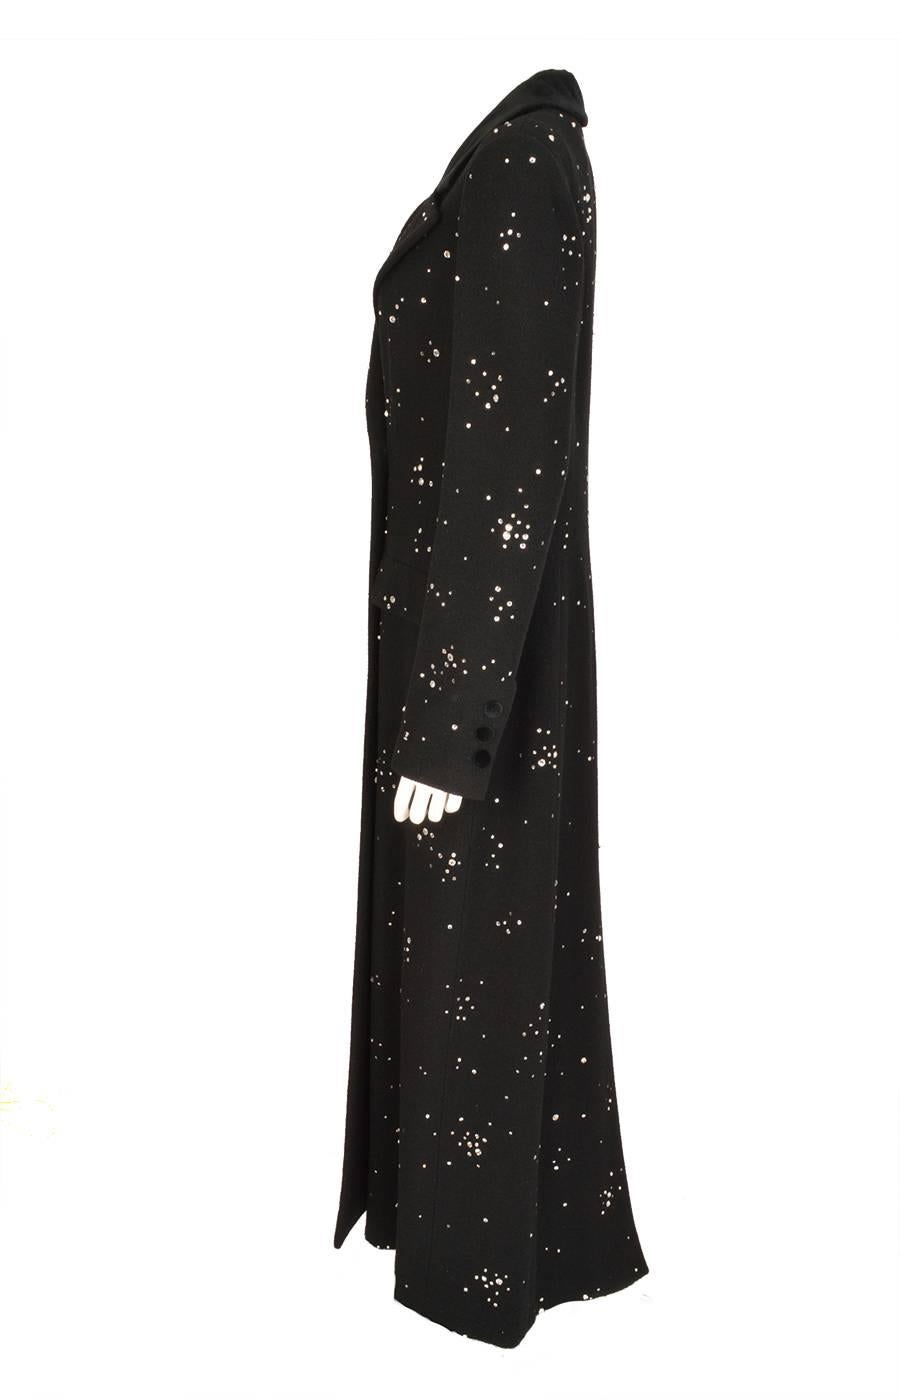 This elegant Chanel double breasted black evening coat in a wool and cashmere blend, sparkles from head to toe with over 1000 hand embroidered multi faceted Swarovski crystals and silver colored beads in various sizes. From the 2006 Fall collection.